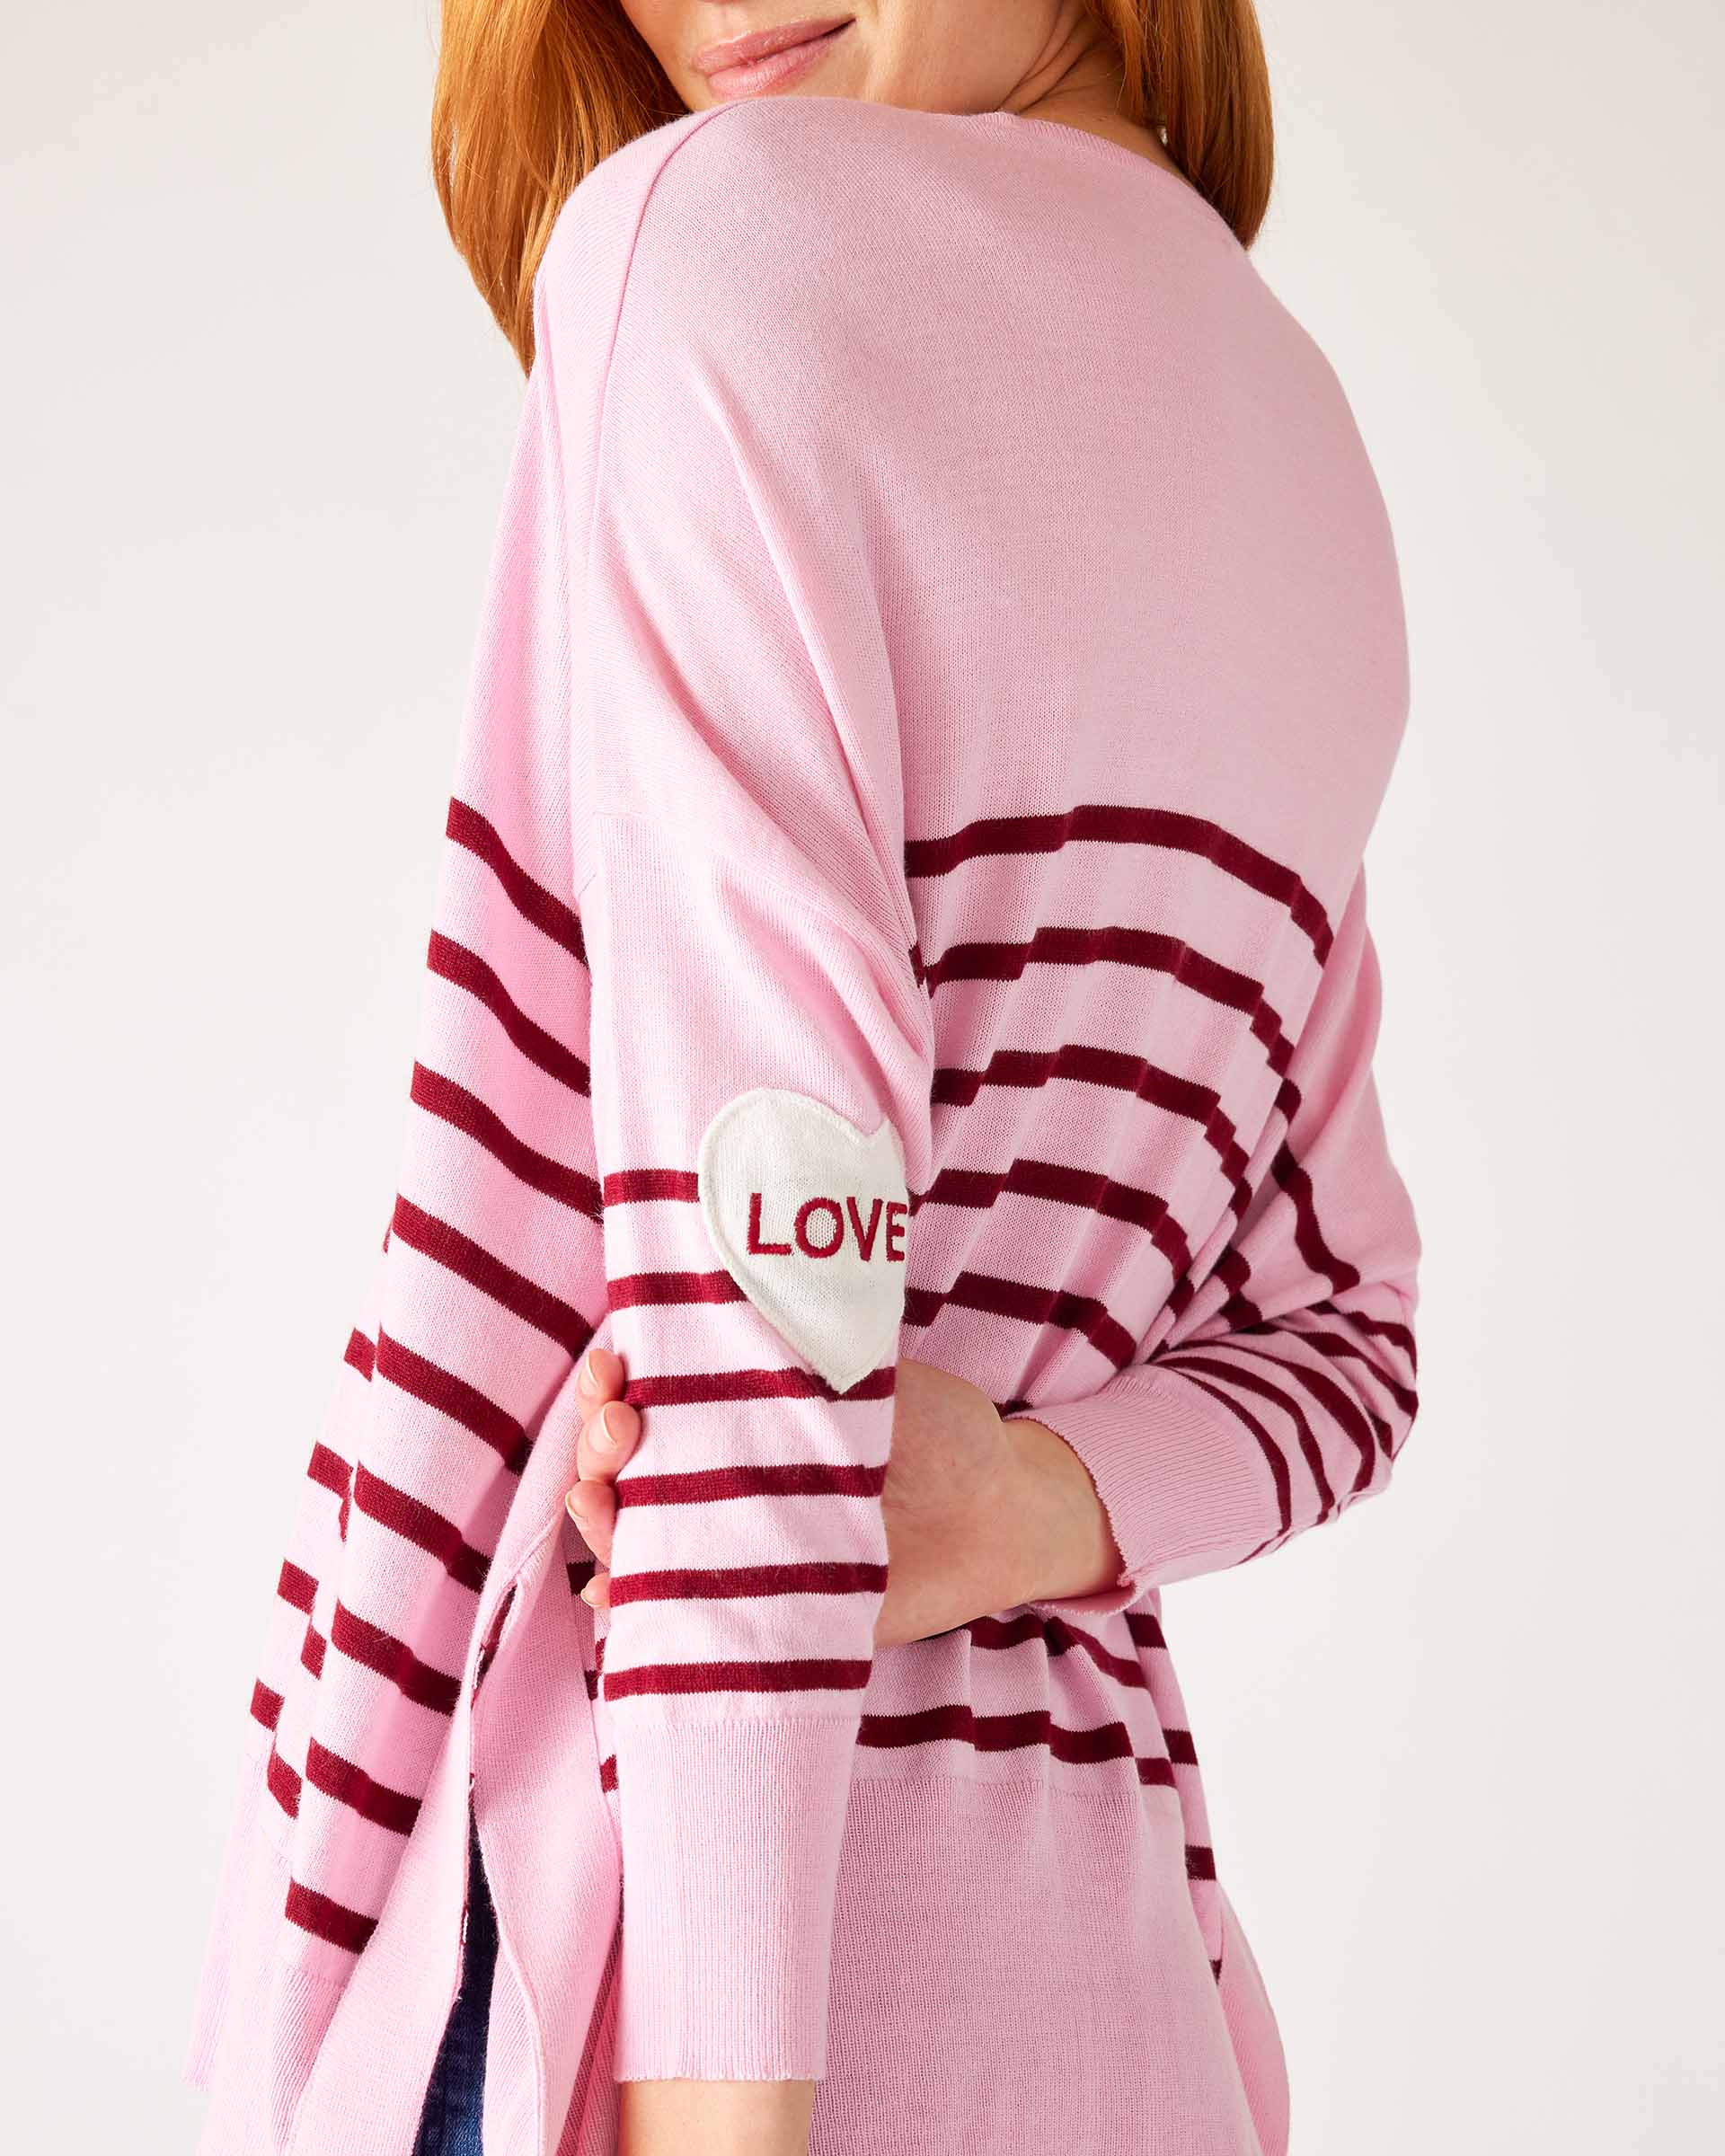 Women's One Size Pink Sweater with Purple Stripes and Hearts on Sleeve Back View